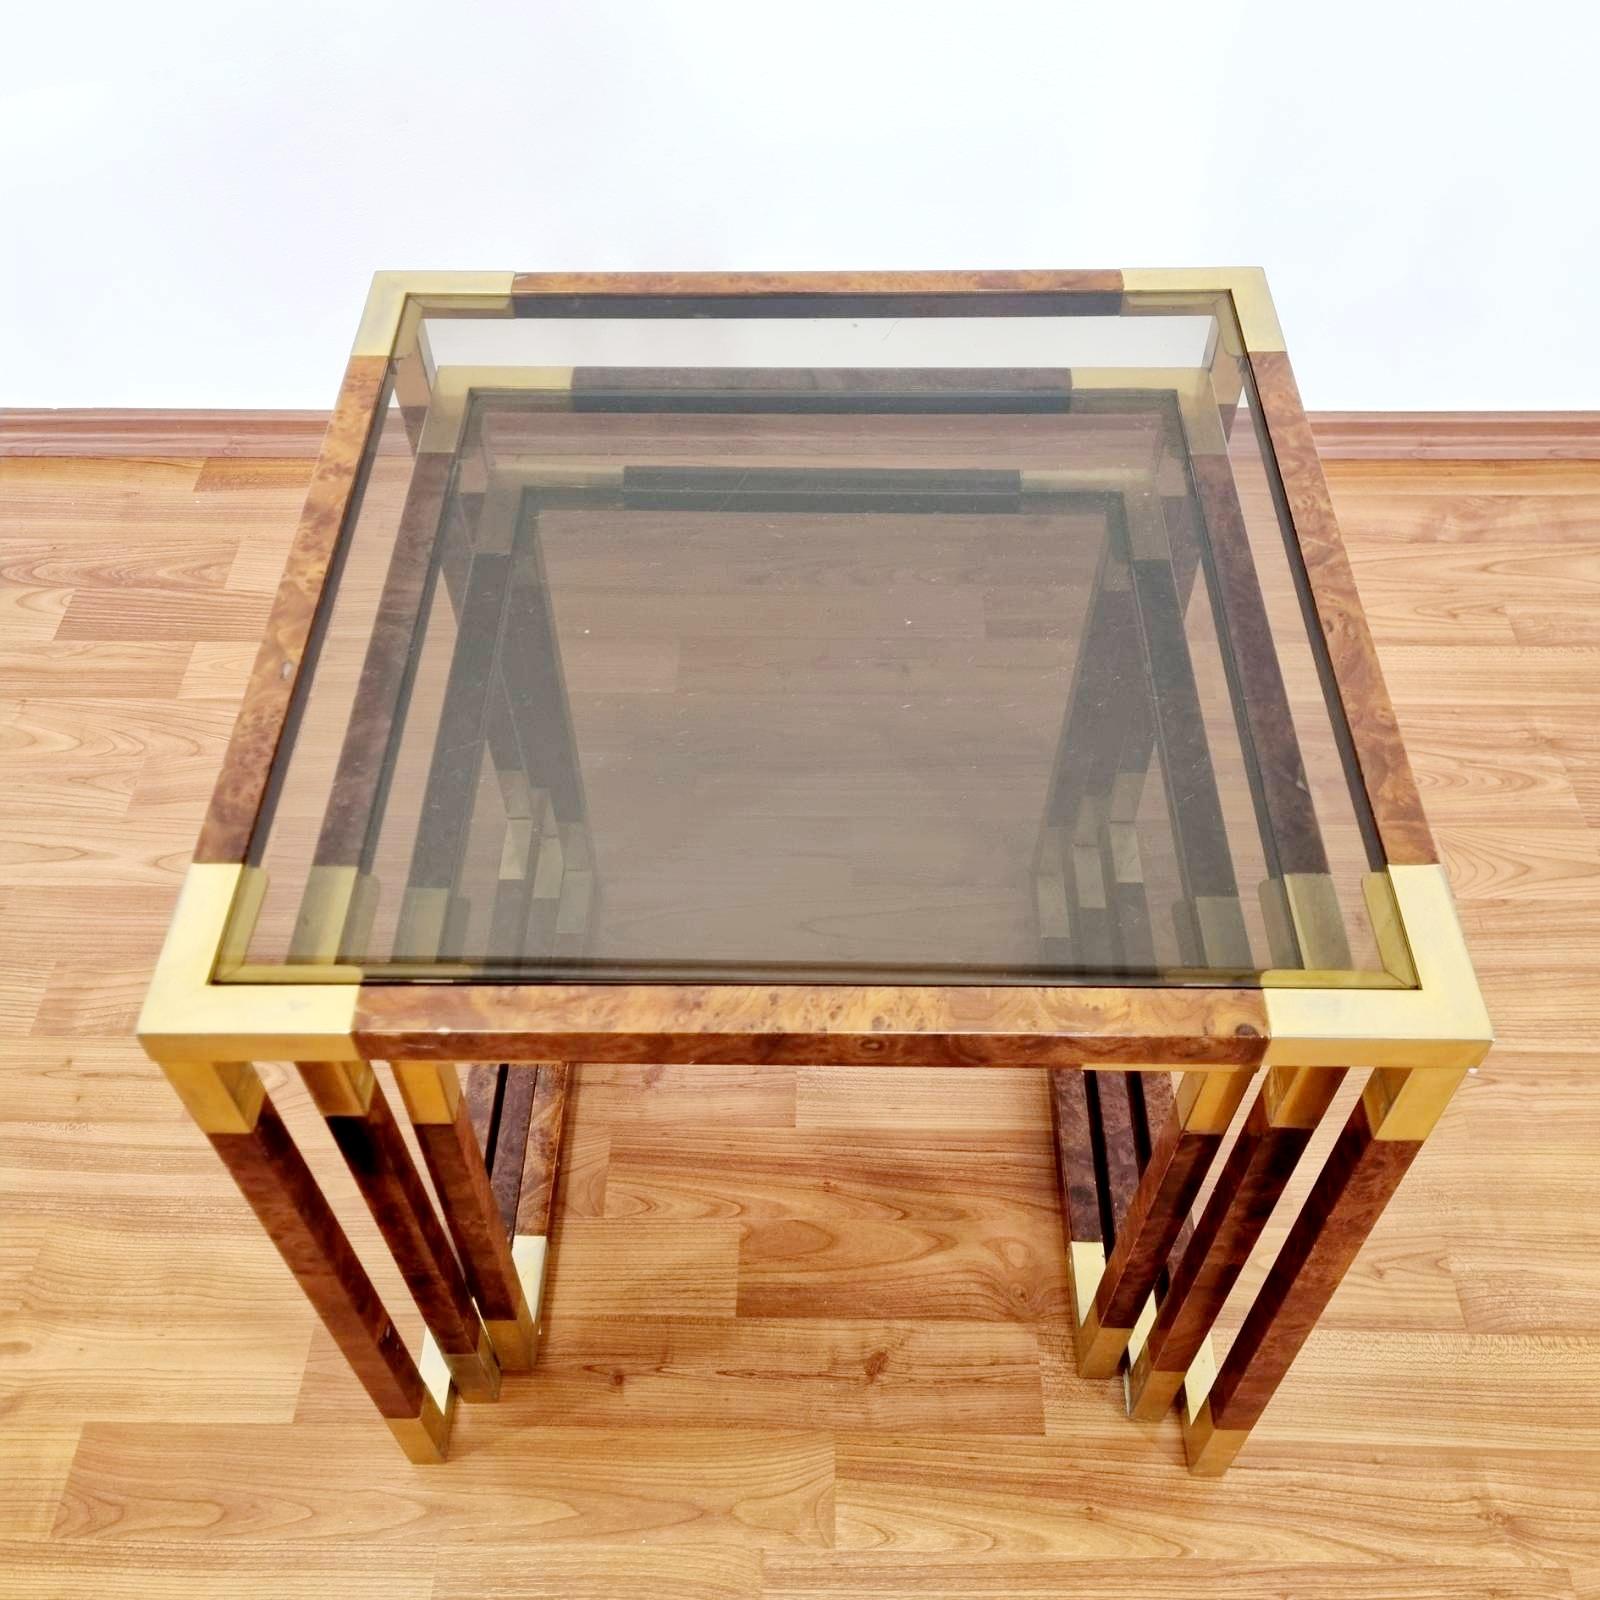 Set of 3 brass, glass and briar root nesting coffee or end tables. Made in Italy in the 1970s.
In very good vintage condition with minor signs of wear on the glass.

Dimensions :
Large table 47x47x47 cm
Medium table 42x42x42 cm
Small table